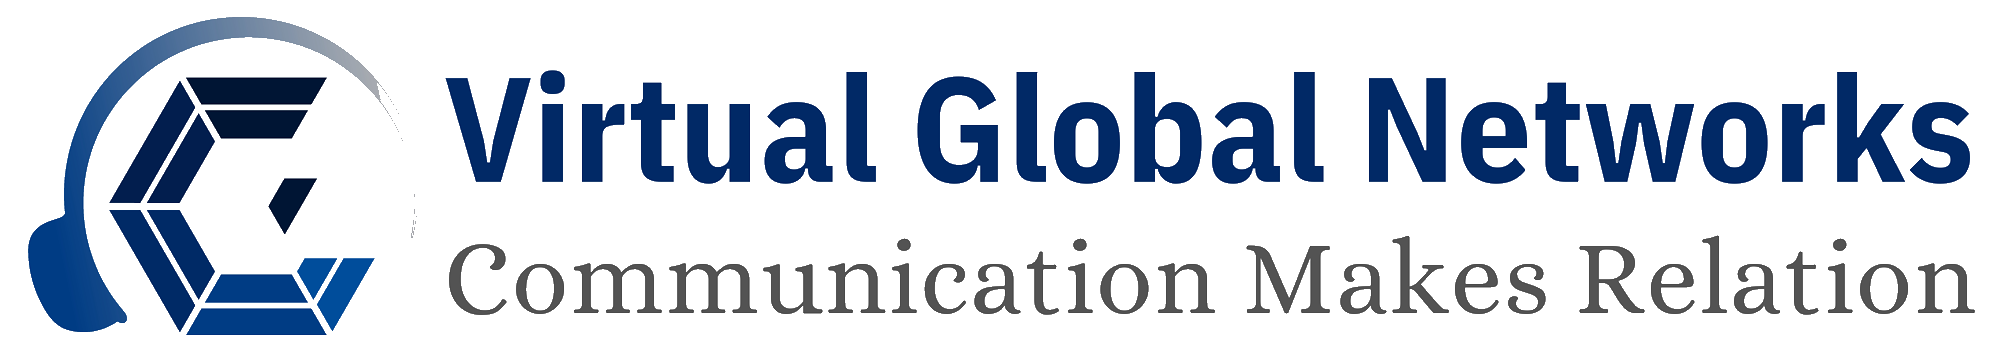 Virtual Global Networks – Communication Makes Relations